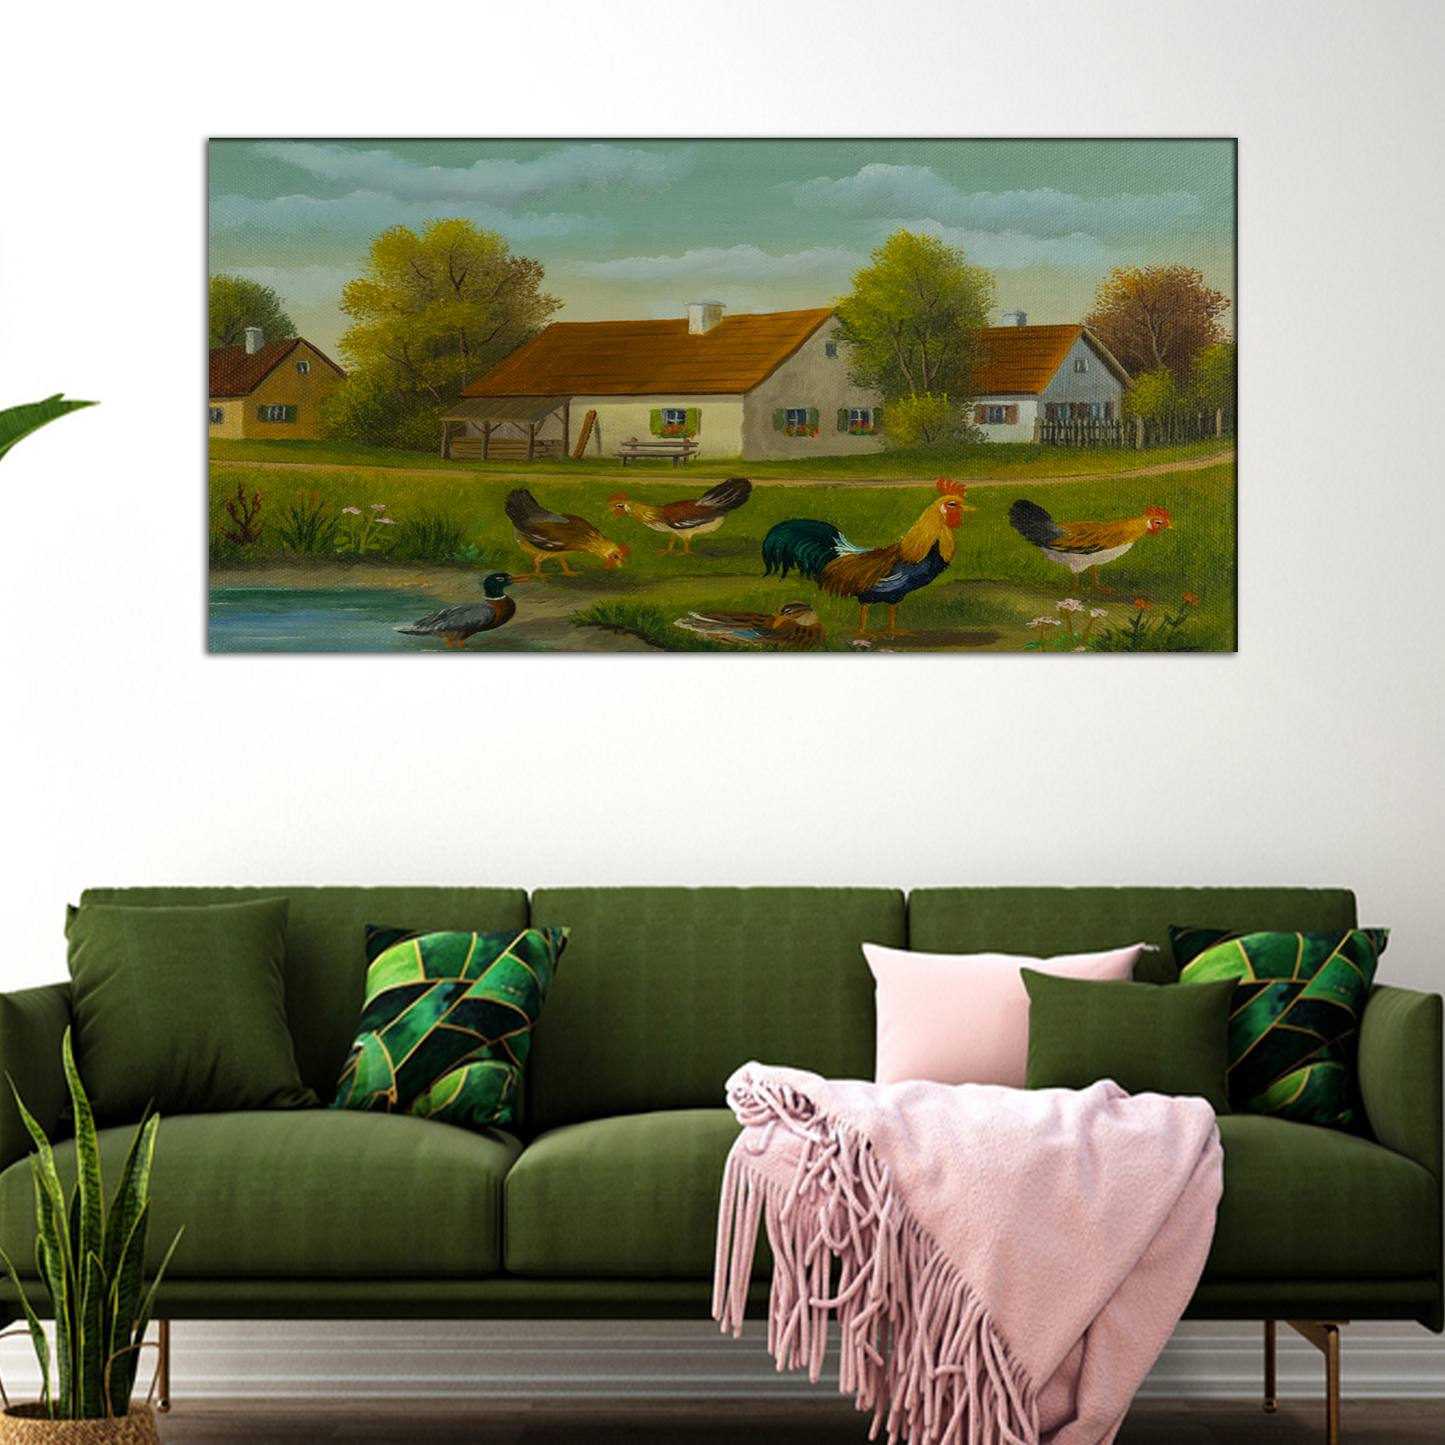 Chickens & Ducks at a Pond Abstract Canvas Print Wall Painting